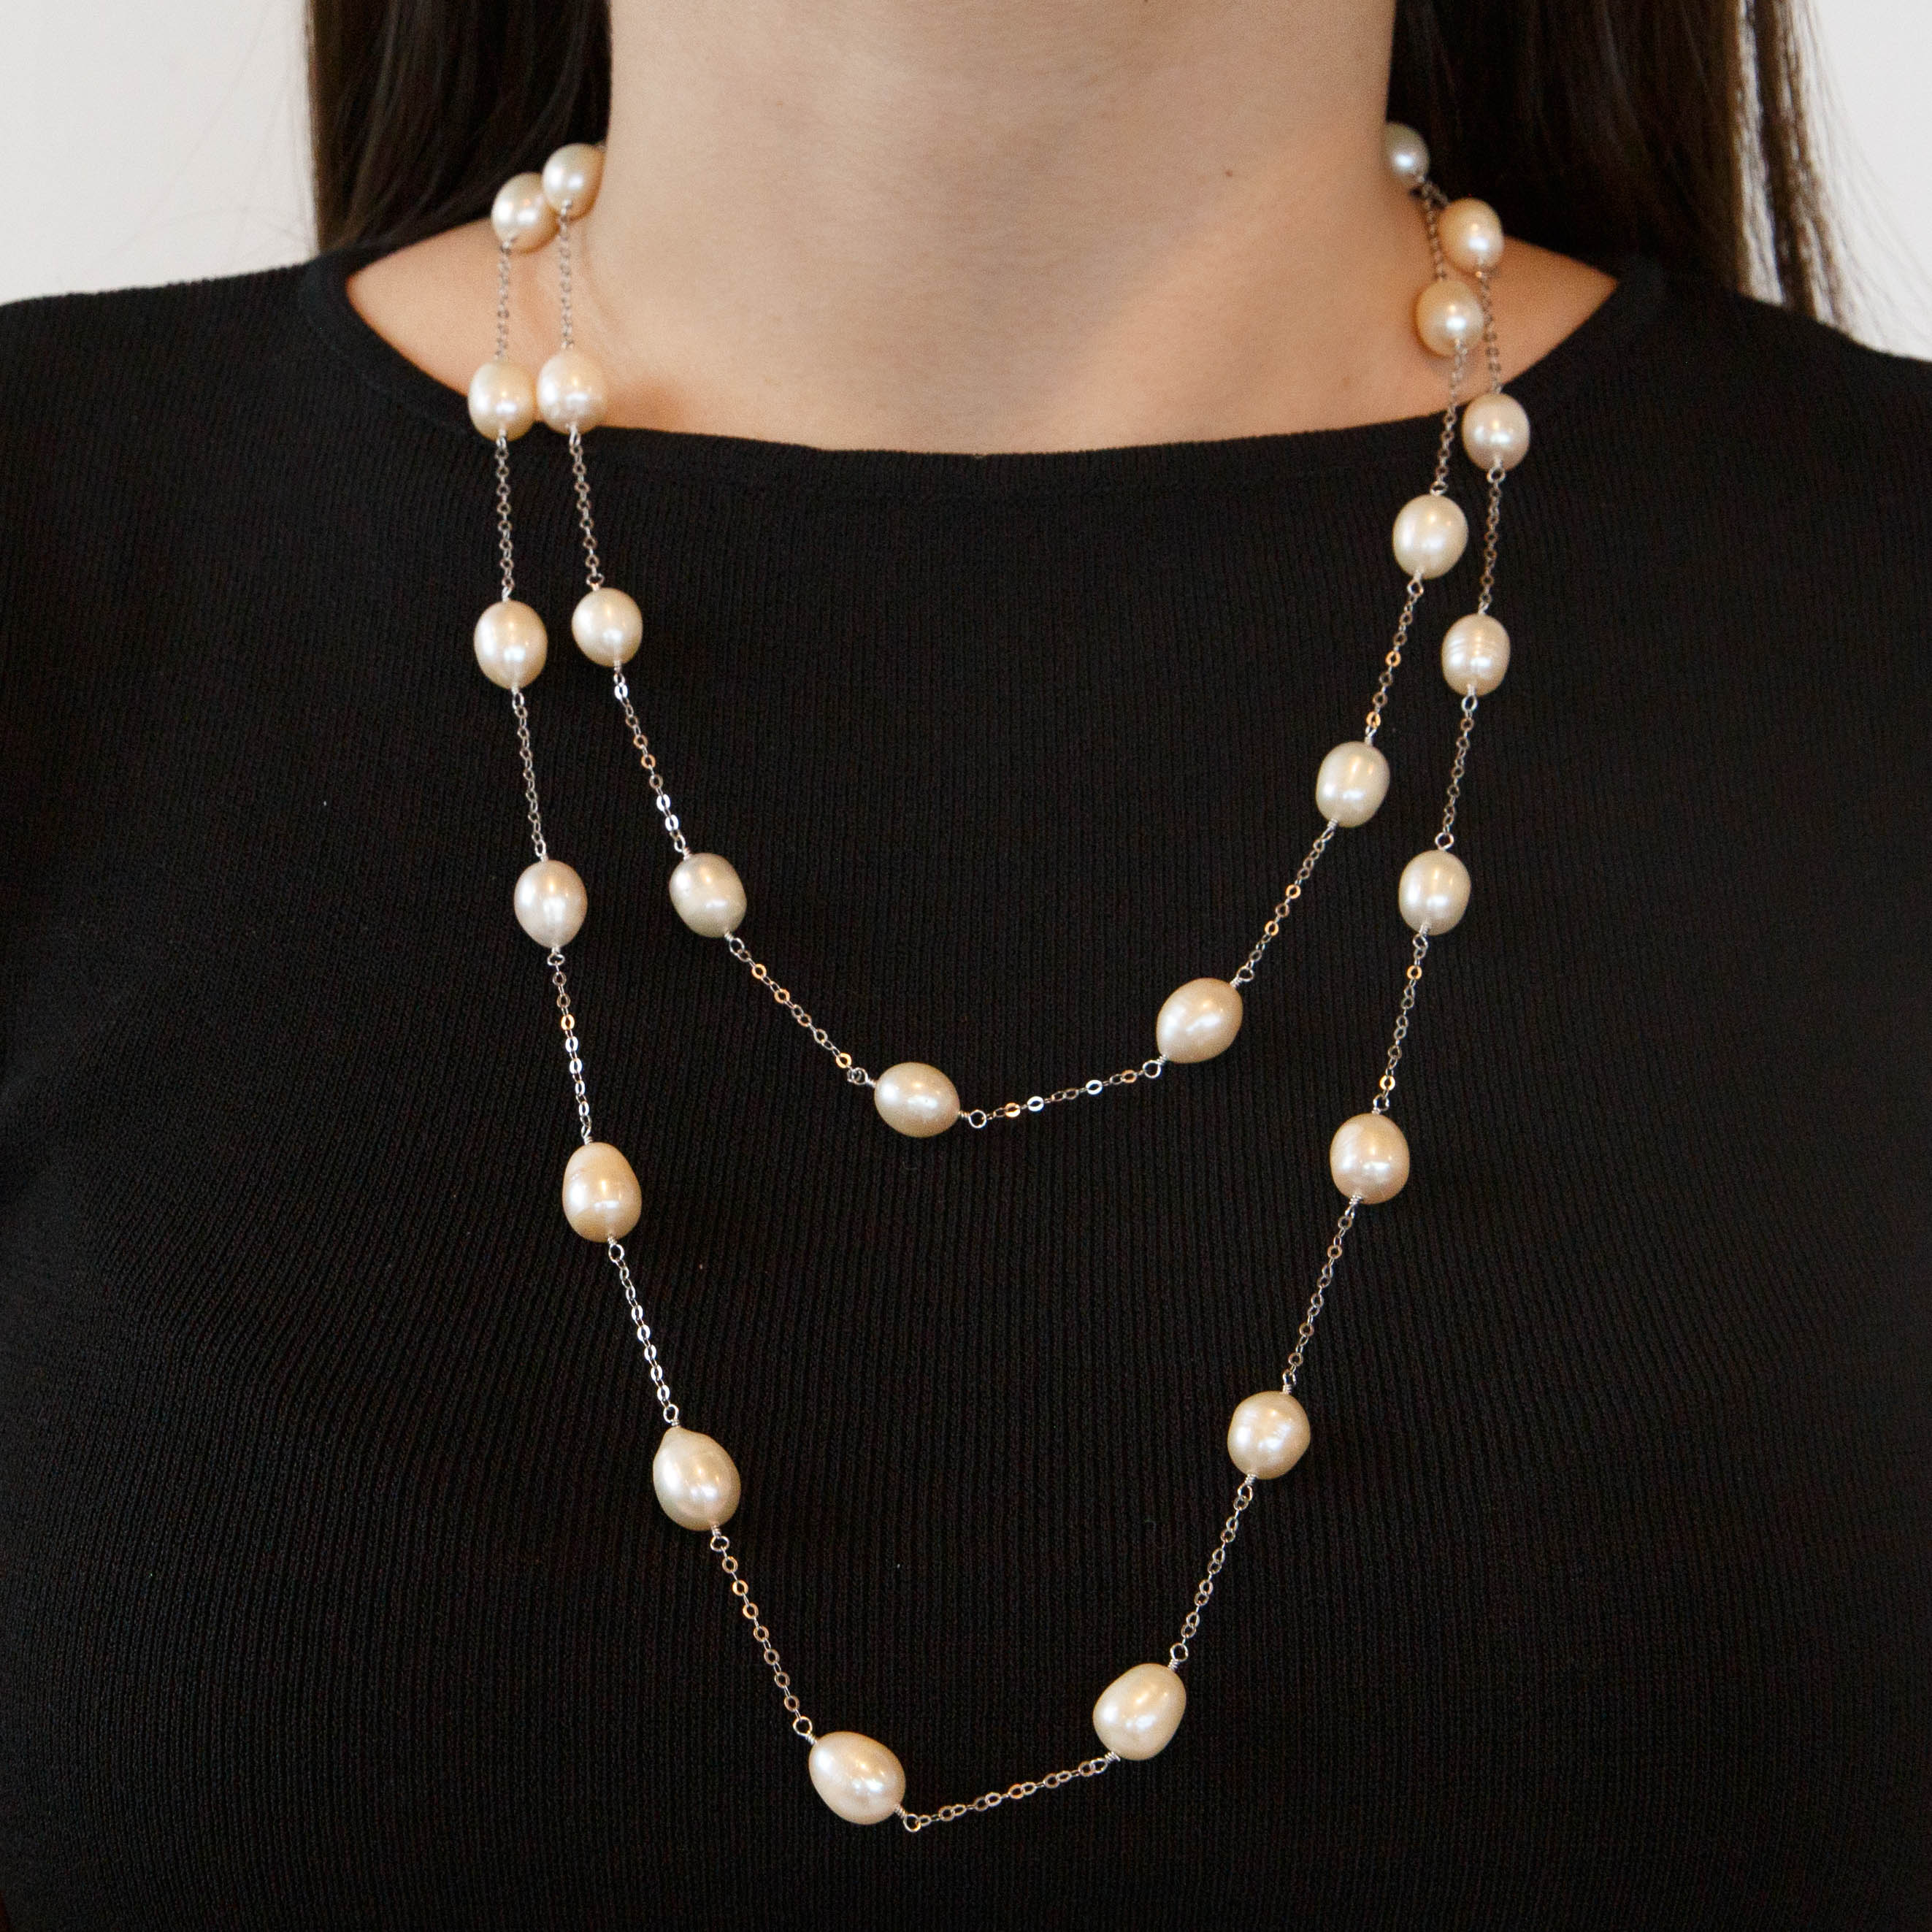 925 SILVER LONG NECKLACE WITH WHITE PEARLS